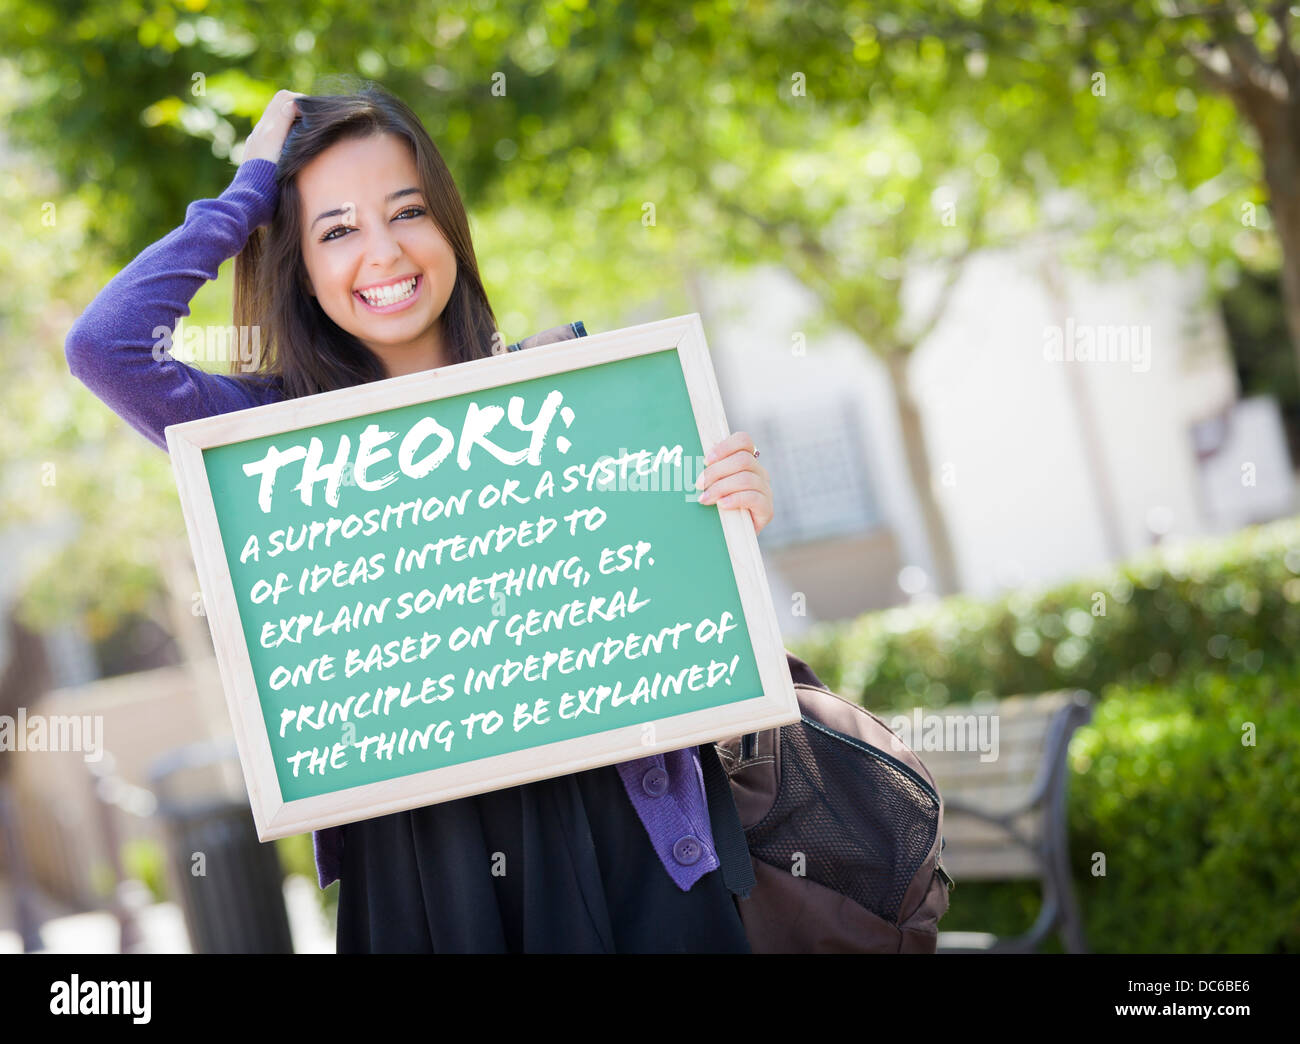 Excited Mixed Race Female Student Holding Chalkboard With Thoery and the Definition Written on it. Stock Photo